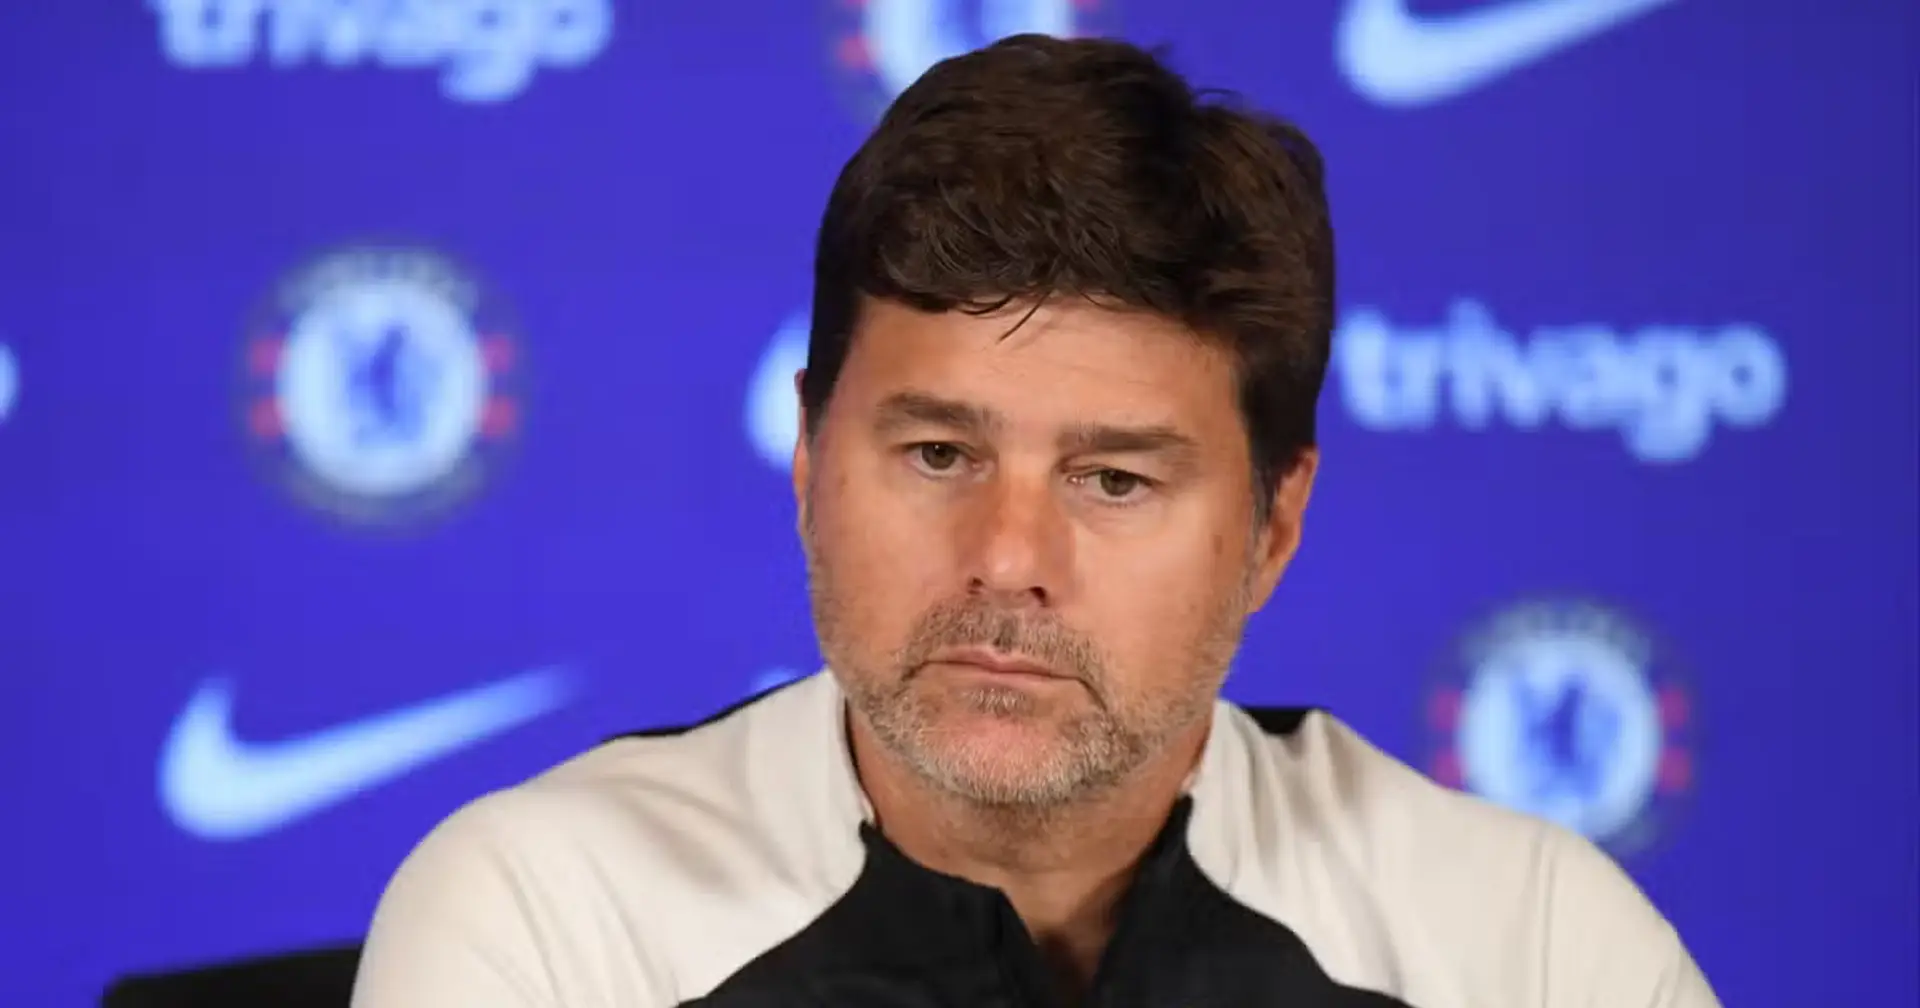 'That is the beauty of the cups': Pochettino on tough but enjoyable Wimbledon game